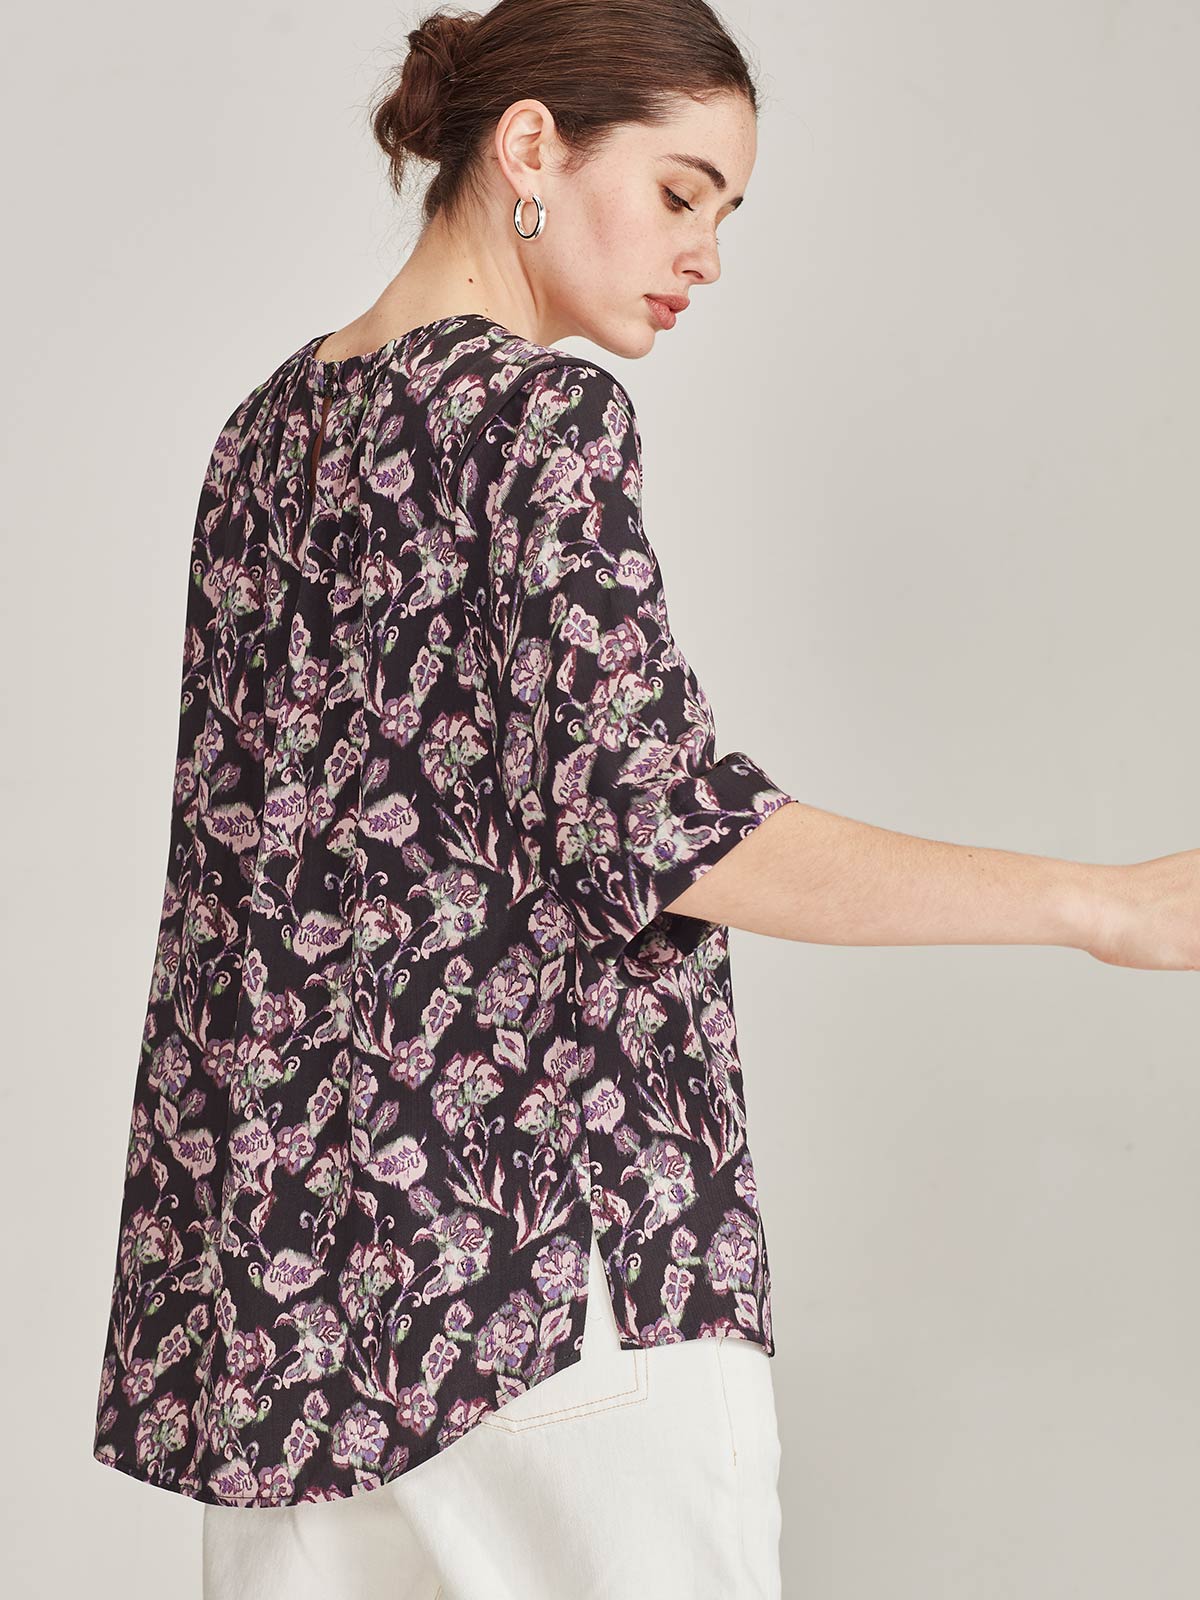 Sills Margaux Floral Tee - Lilac